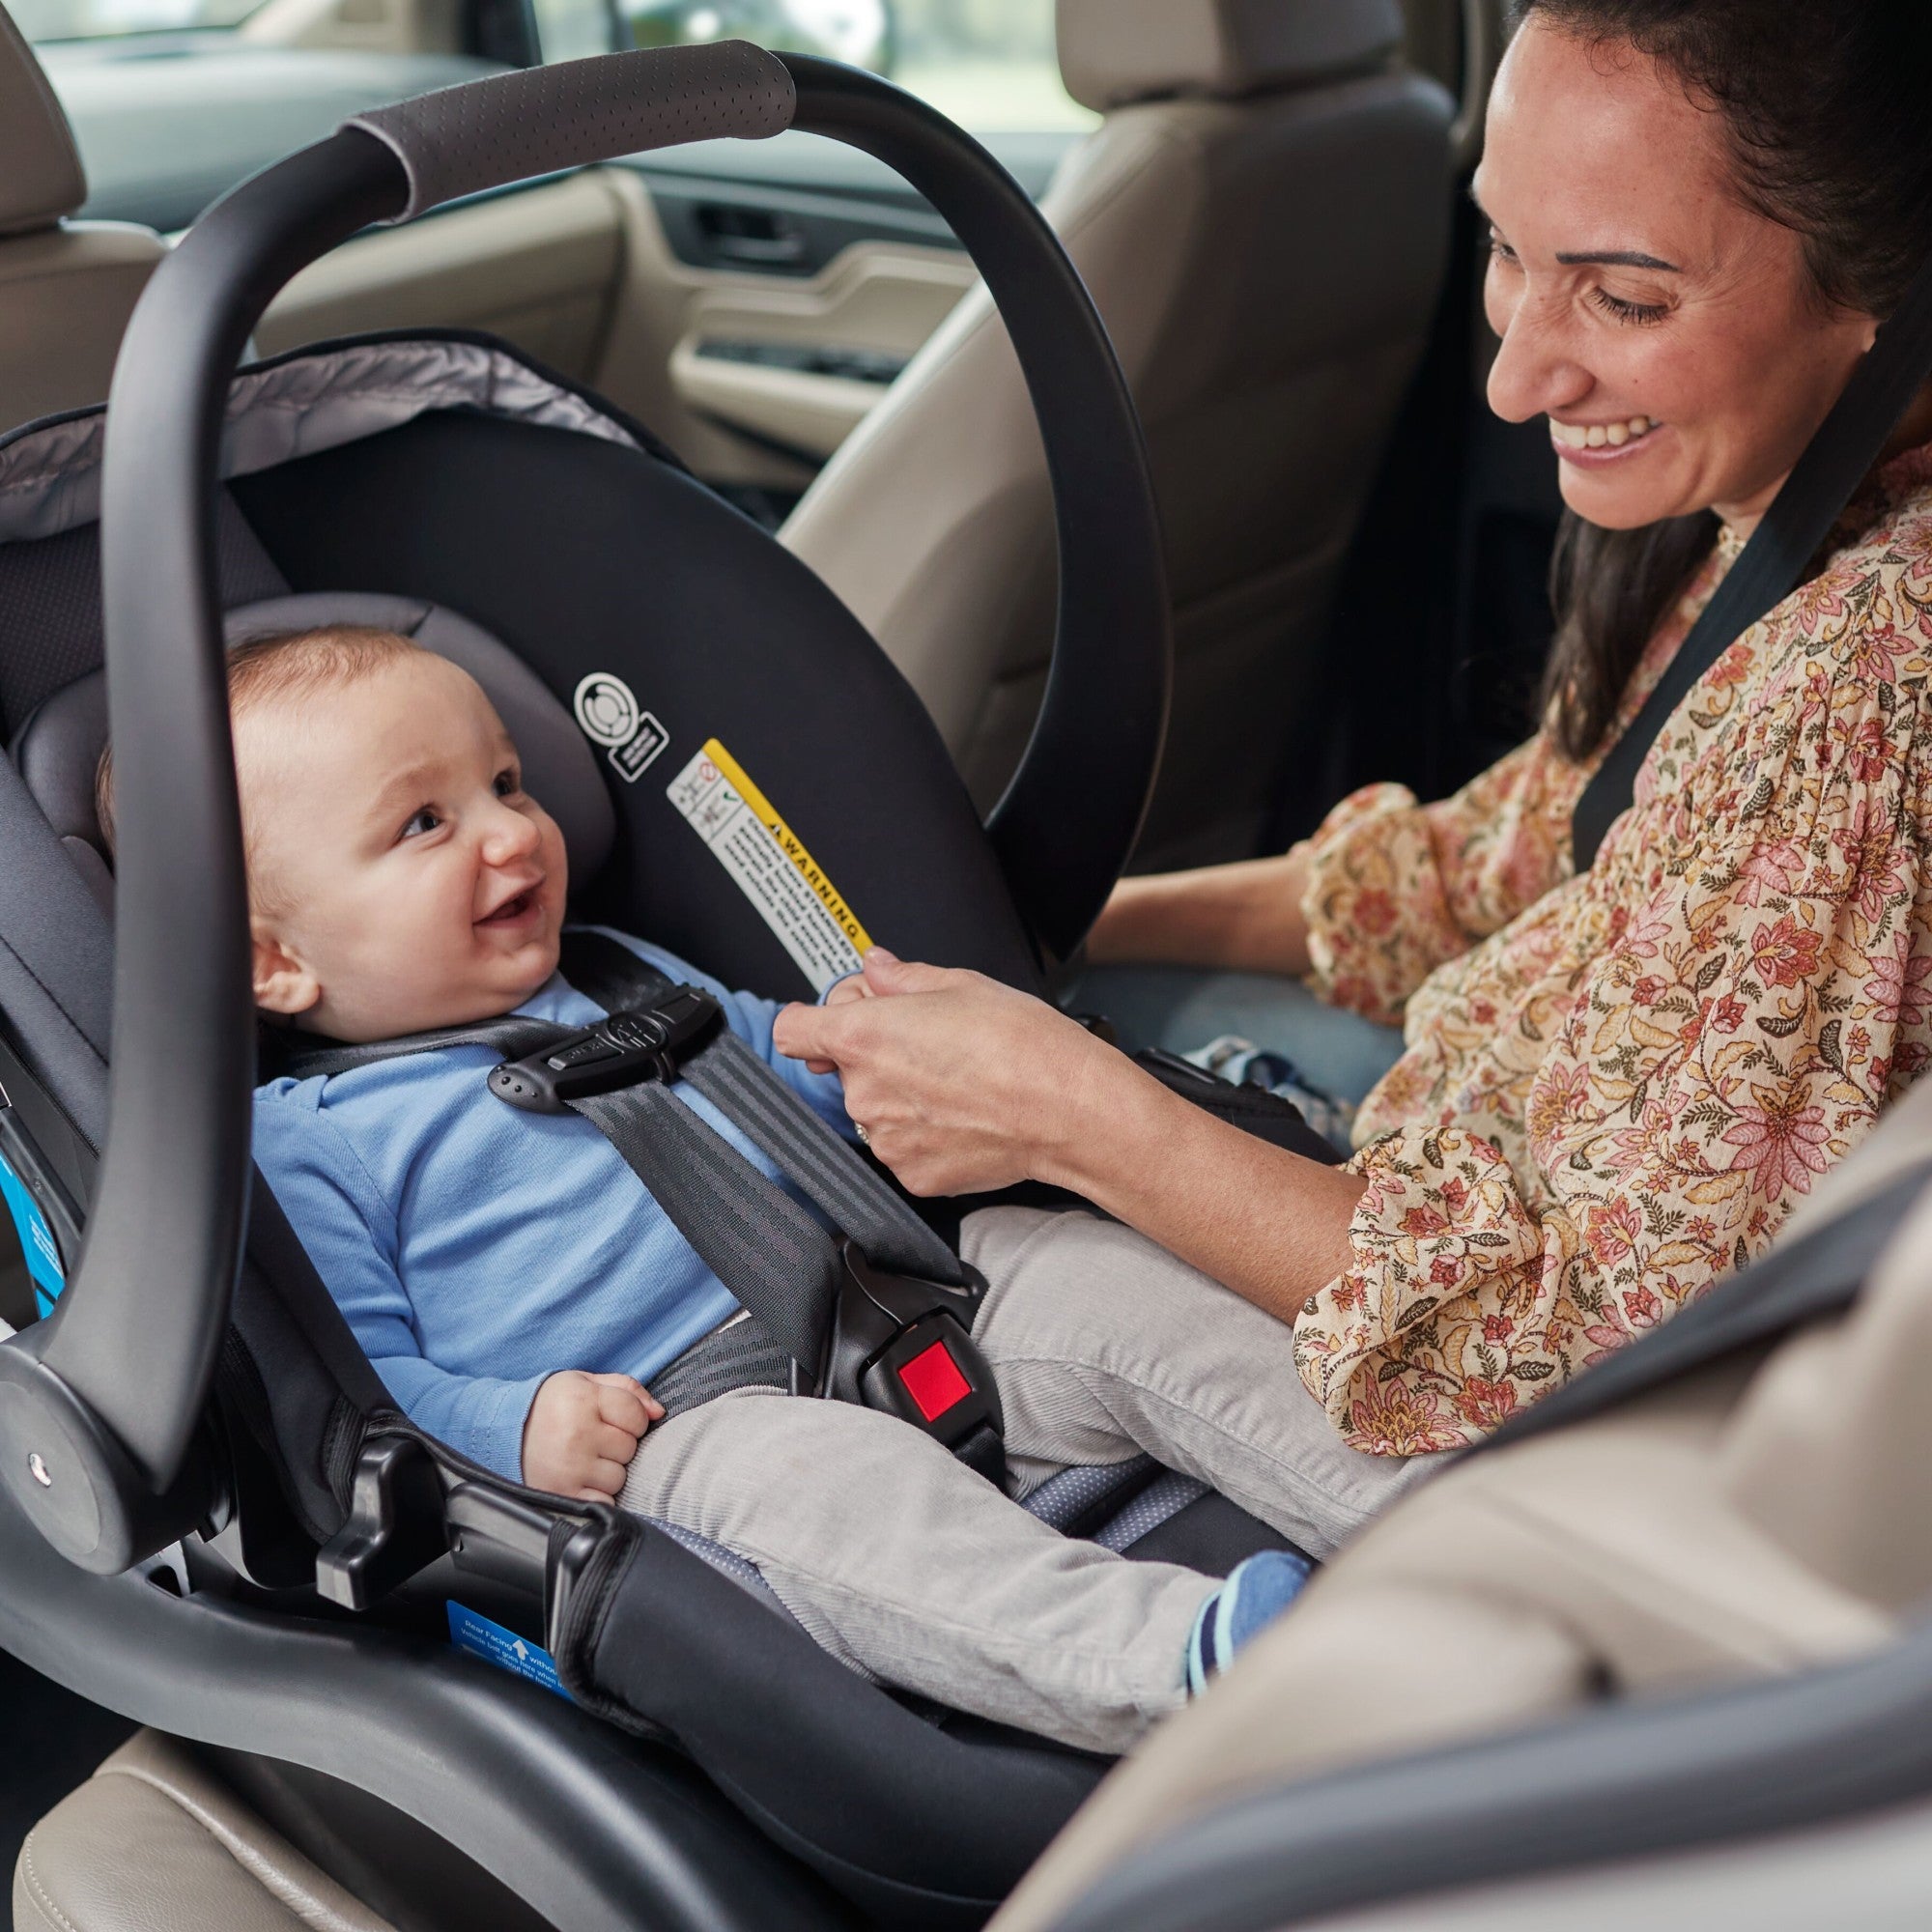 onBoard™35 SecureTech™ Infant Car Seat - mother gazing at smiling infant in seat